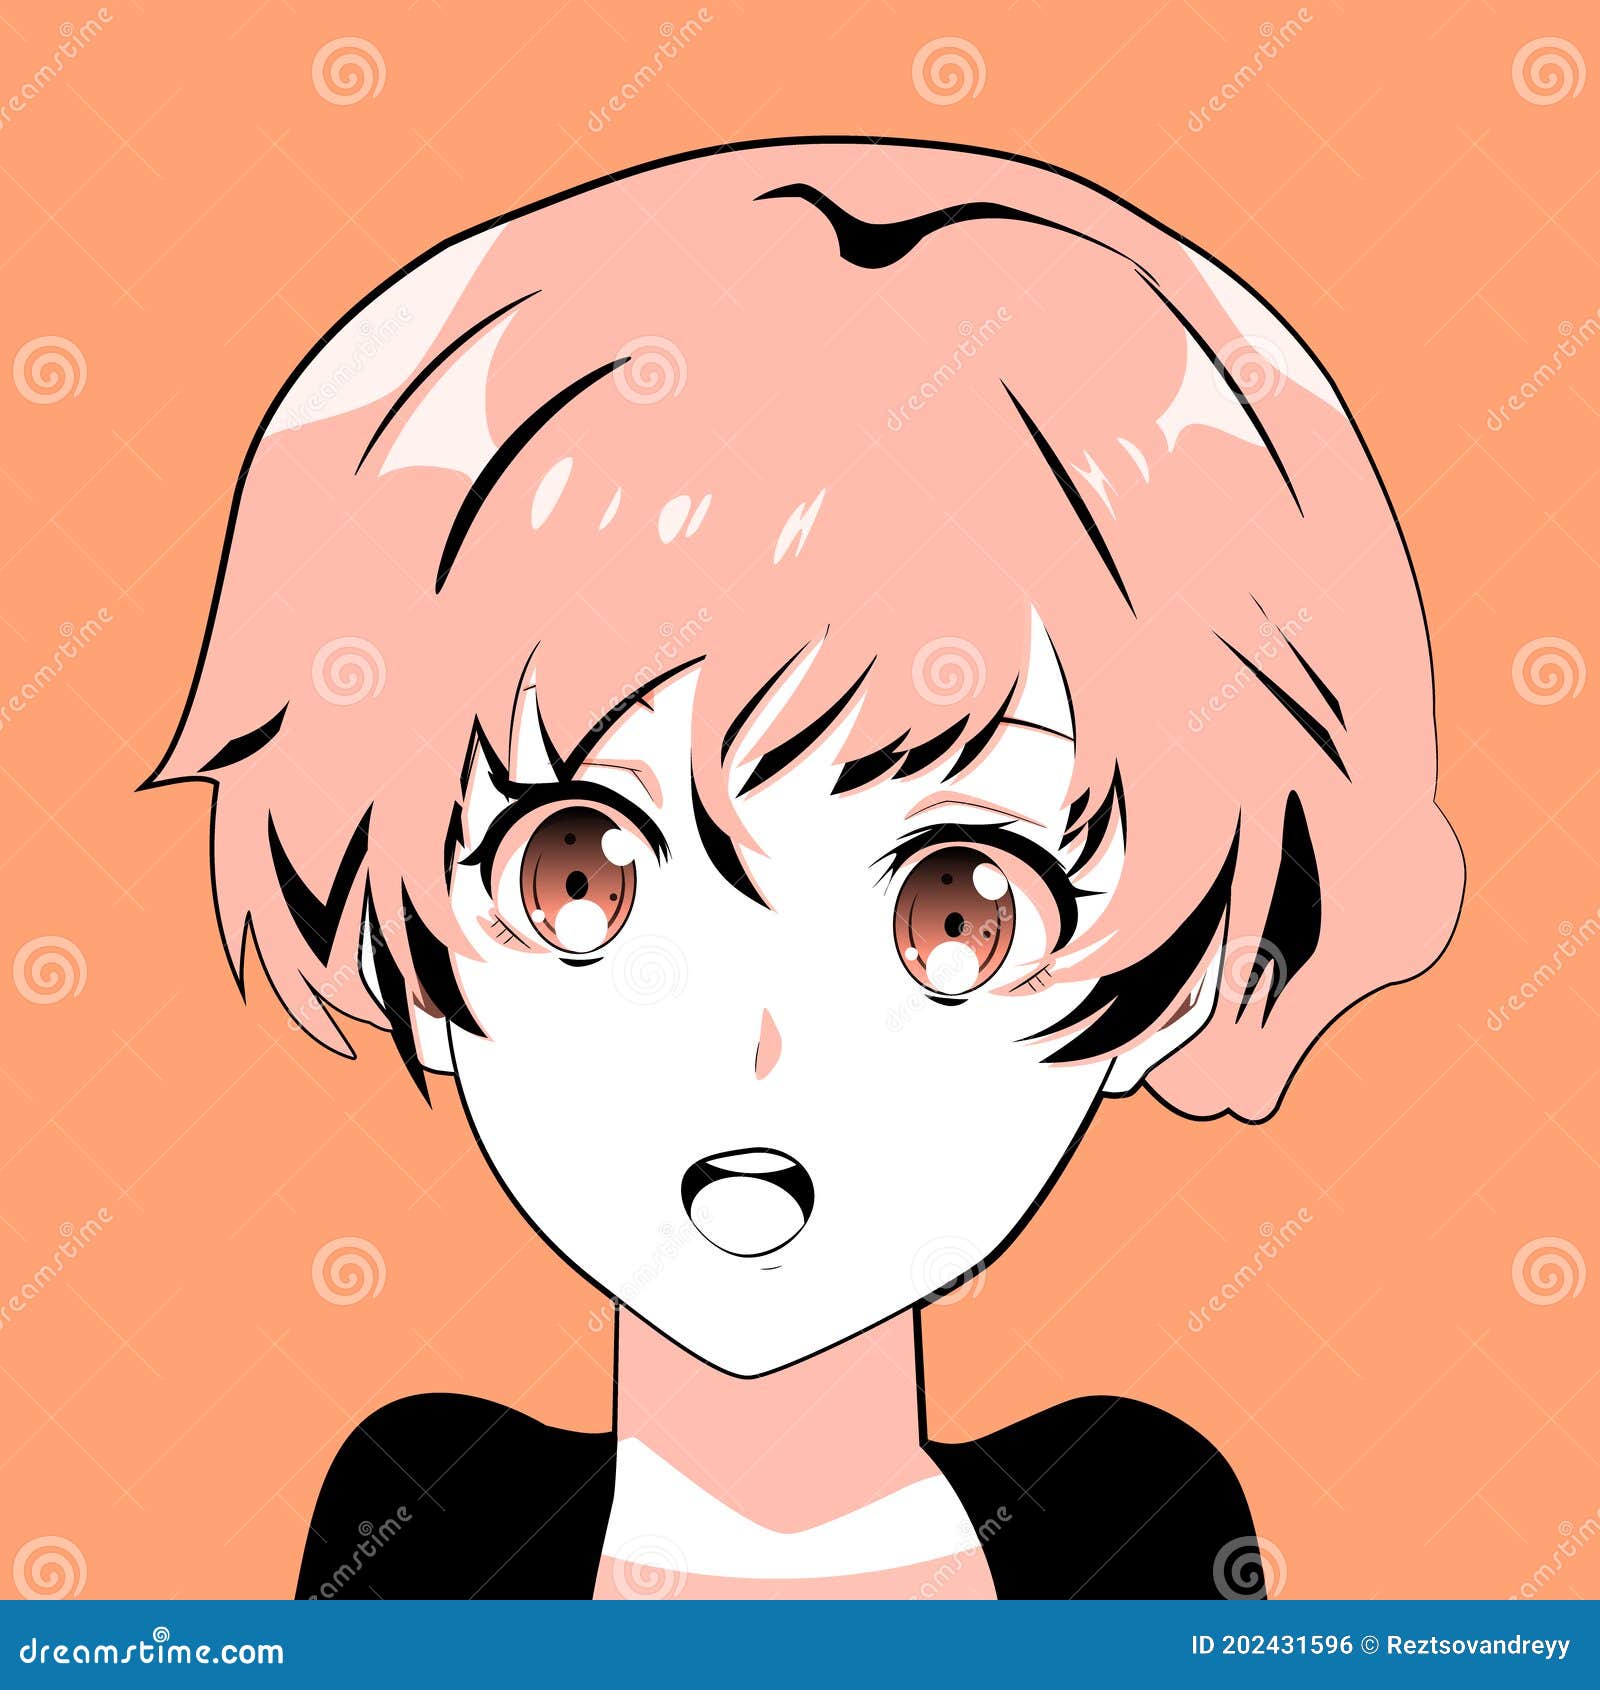 My Own Anime Character Colored by aNiMe0919 on DeviantArt